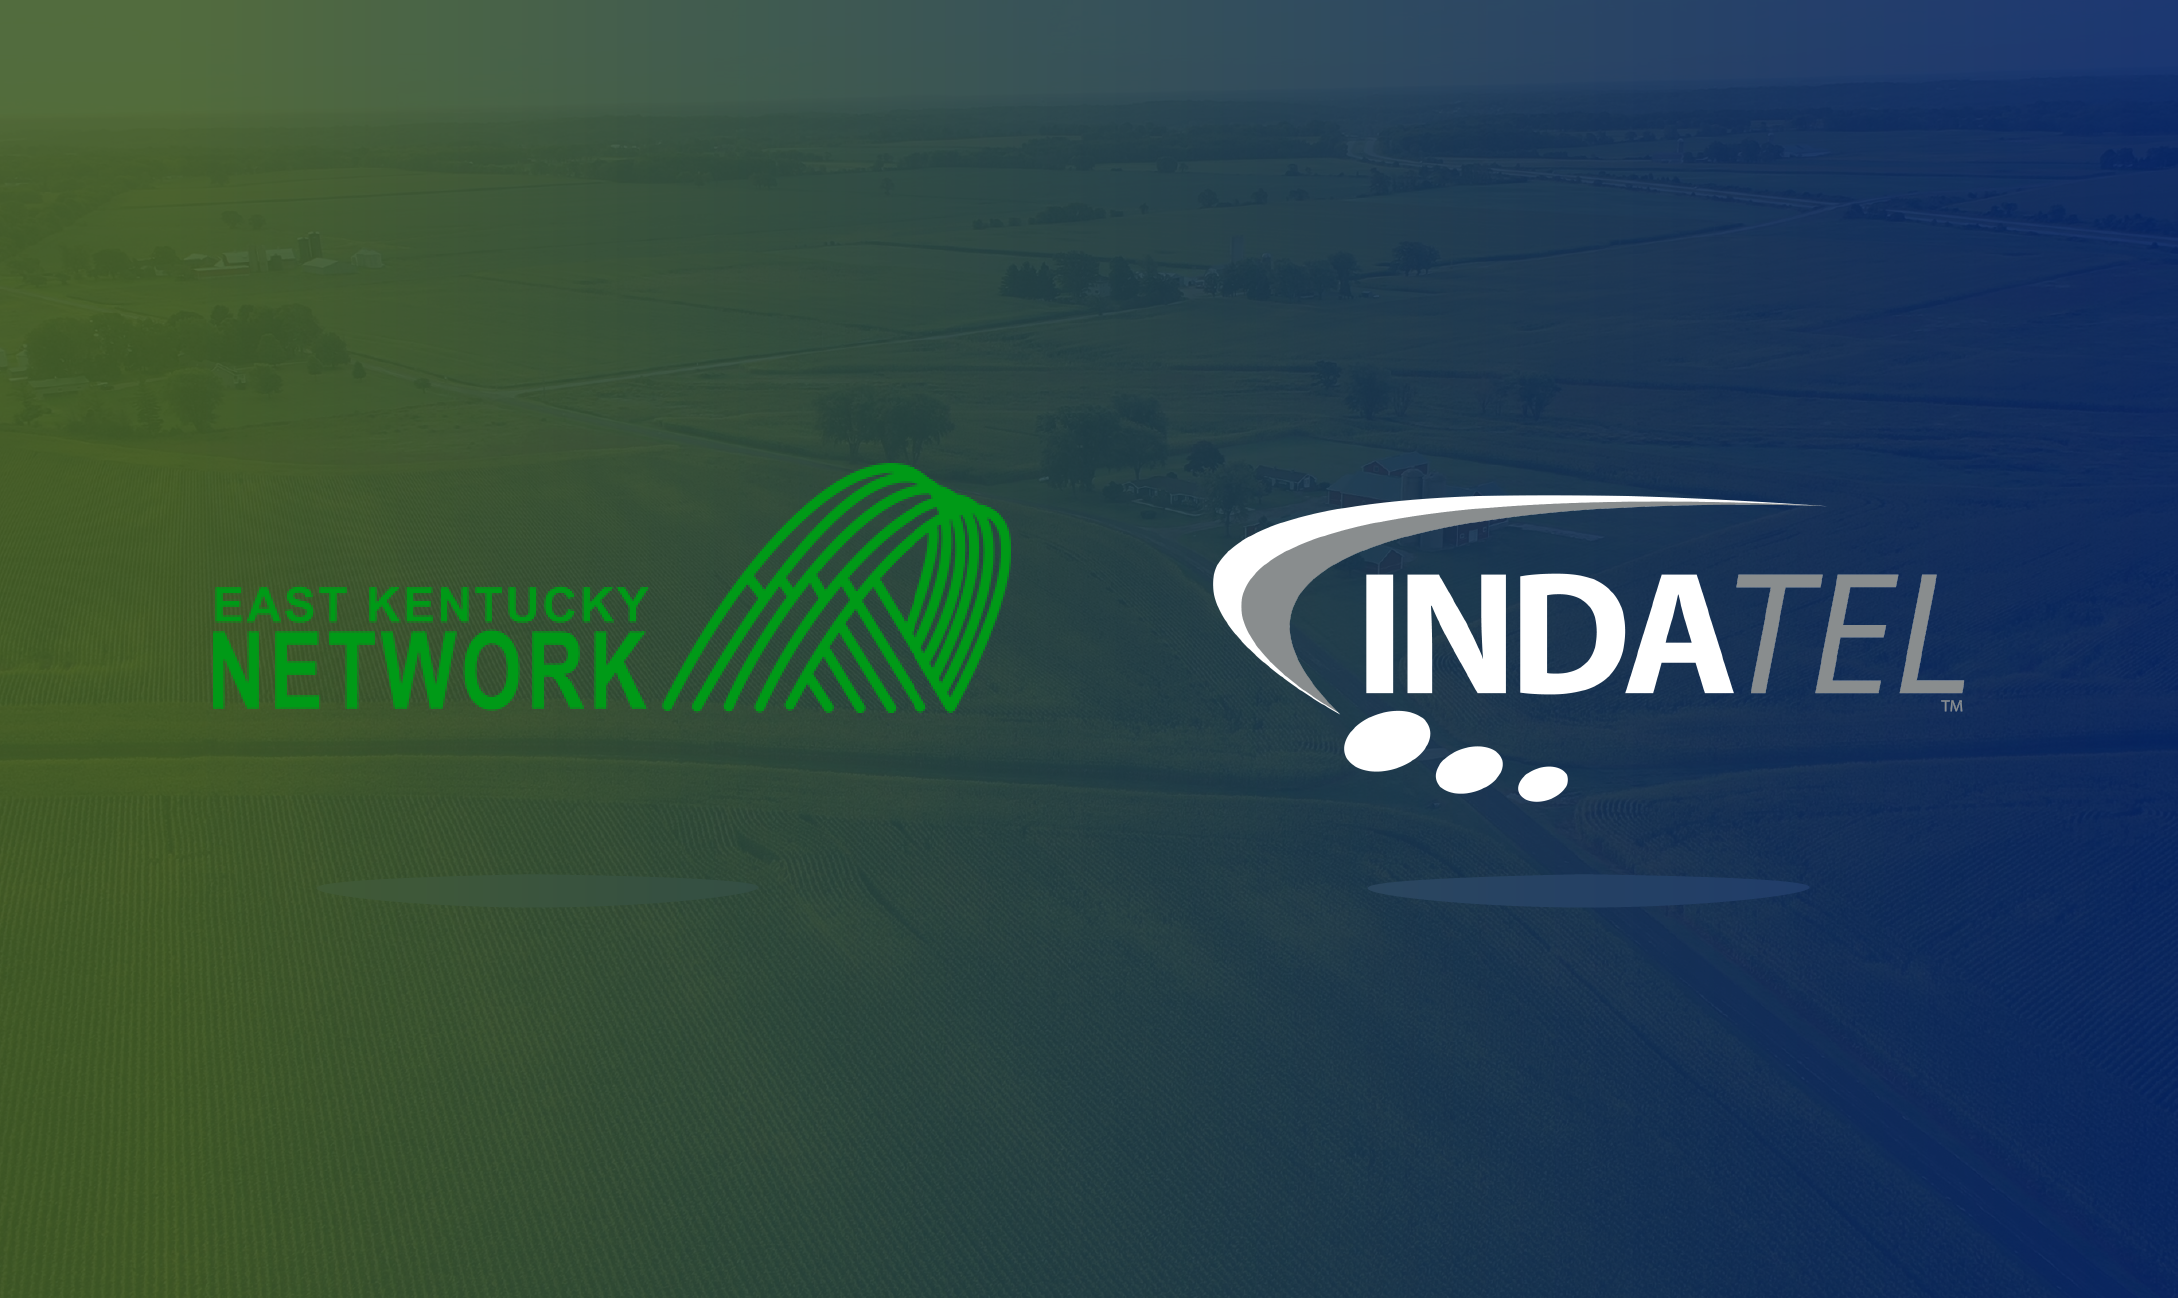 INDATEL Welcomes East Kentucky Network as New Member featured image